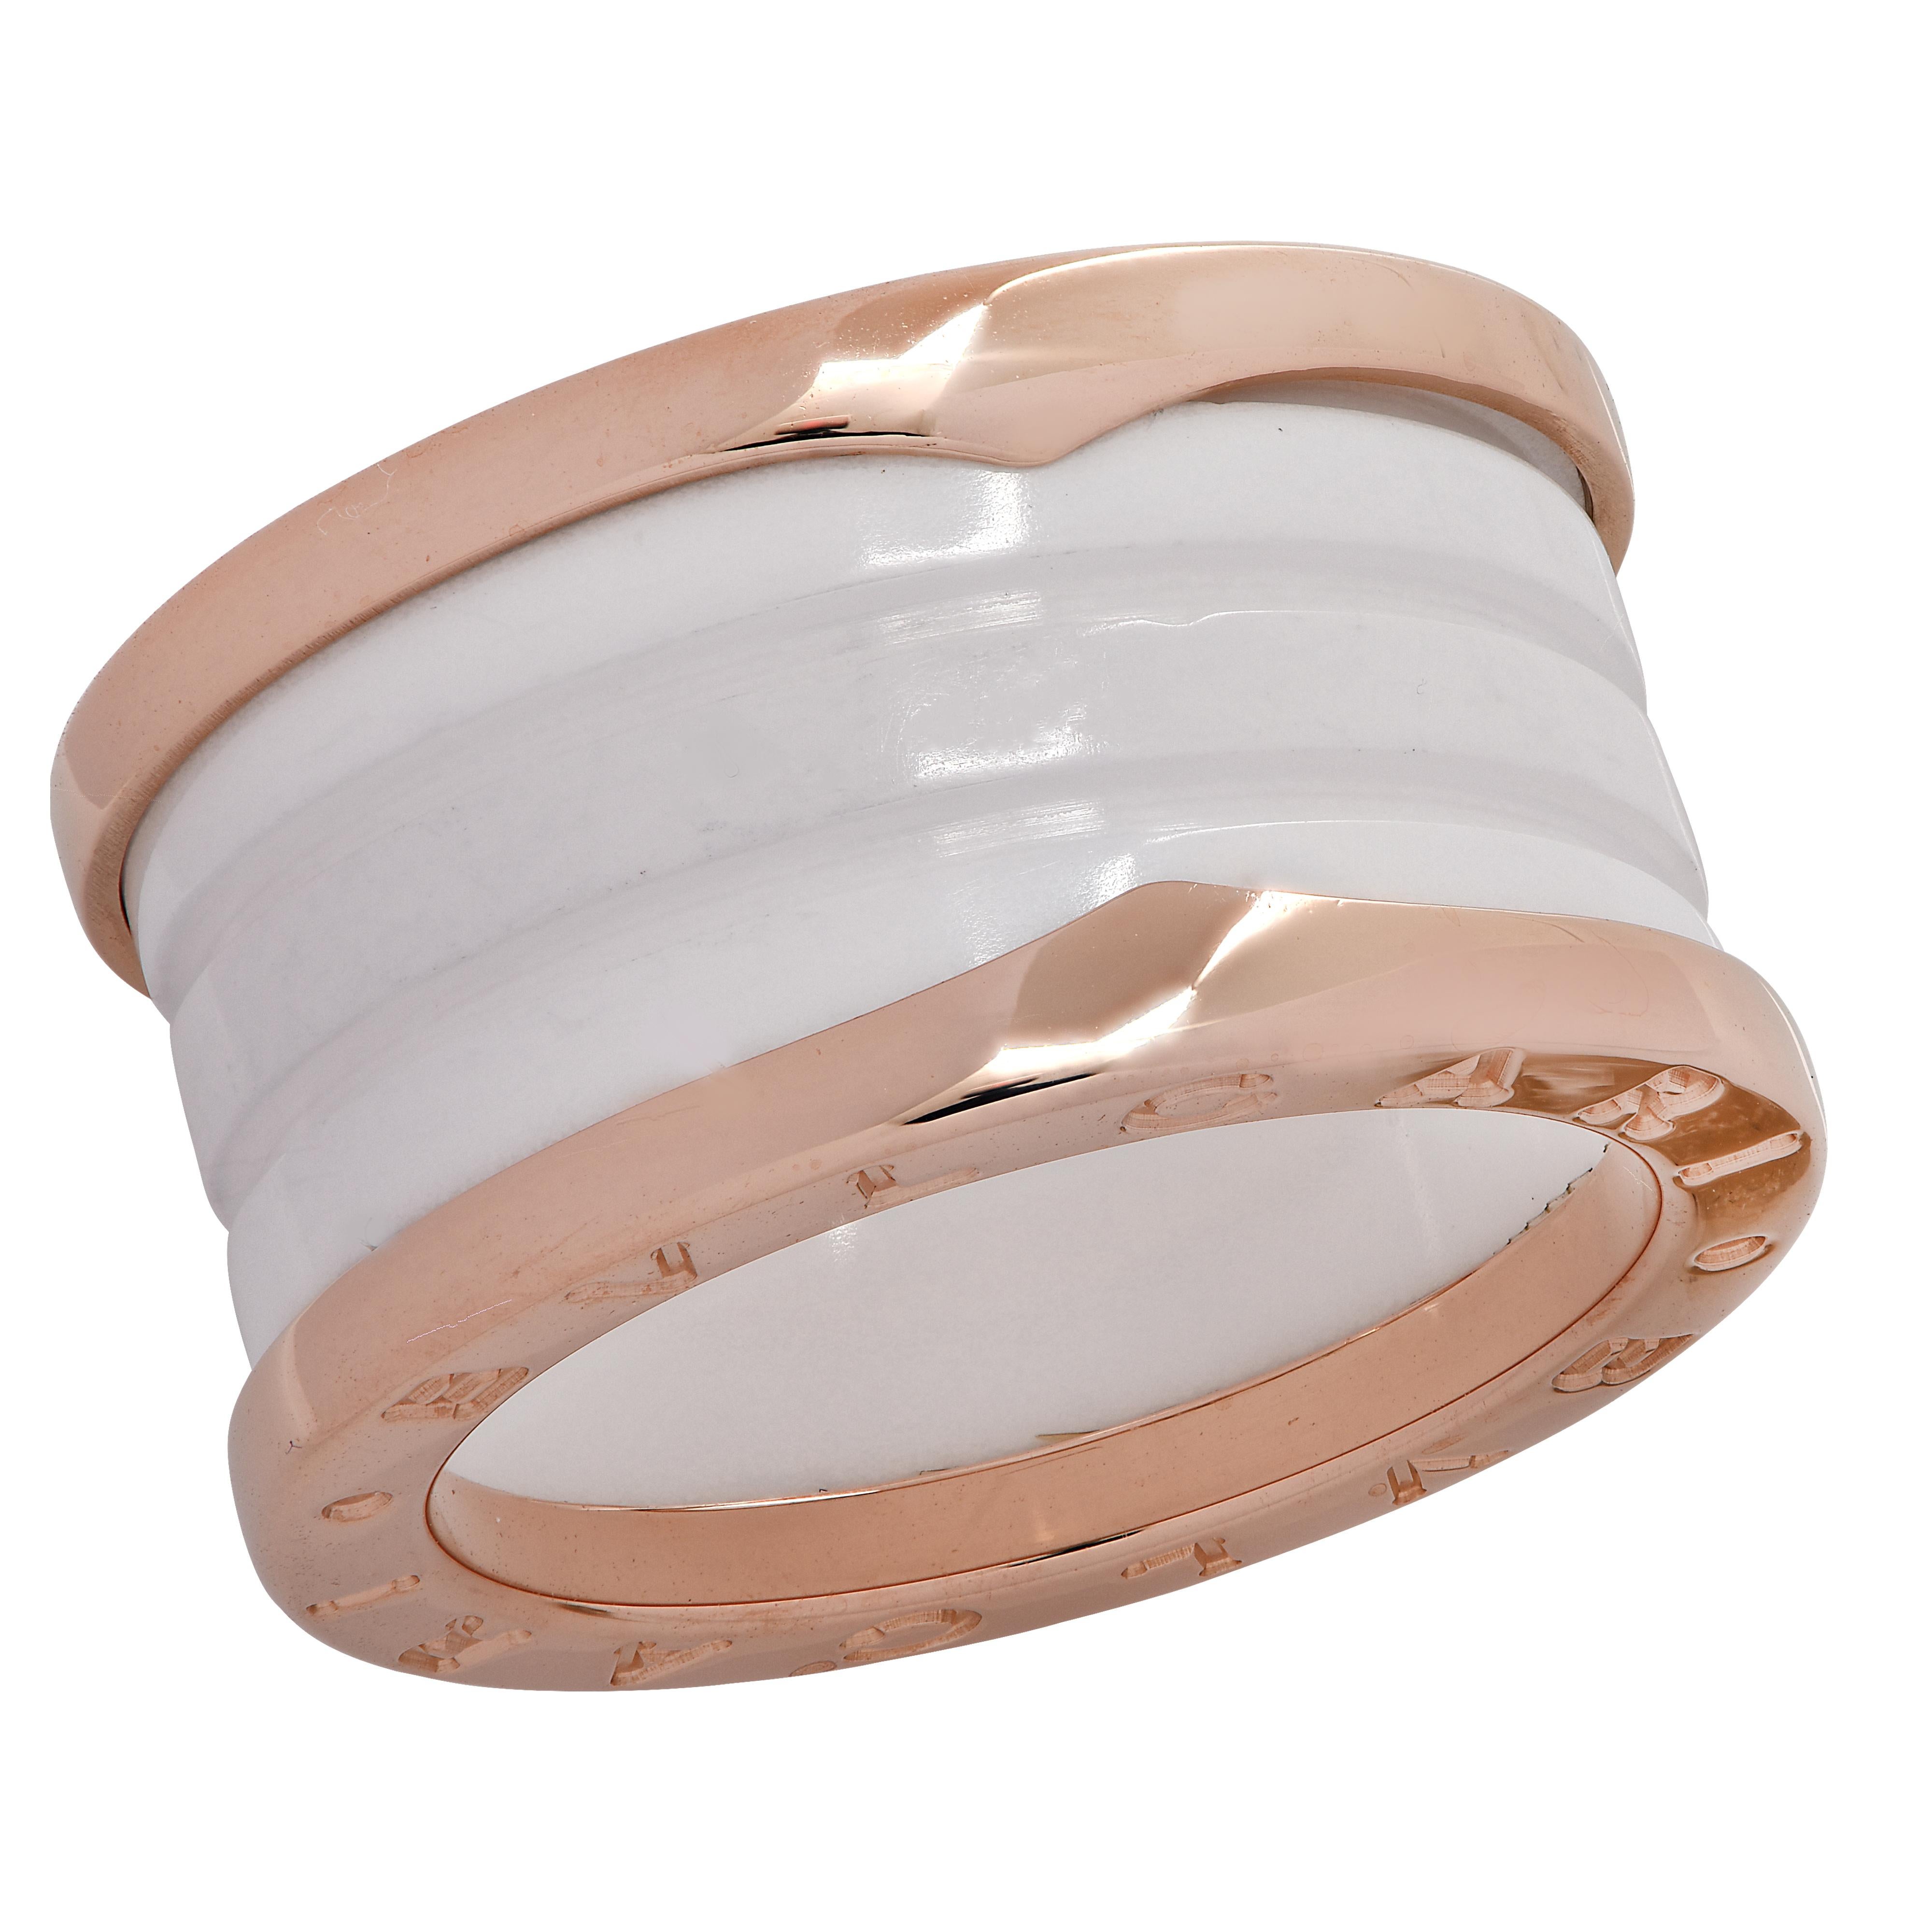 From the House of Bvlgari, this stunning band from the B.Zero 1 collection features two bands crafted in 18 karat rose gold, detailed with the Bvlgari logo, framing a white ceramic grooved band. This stunning ring measures 12 mm in width and is a